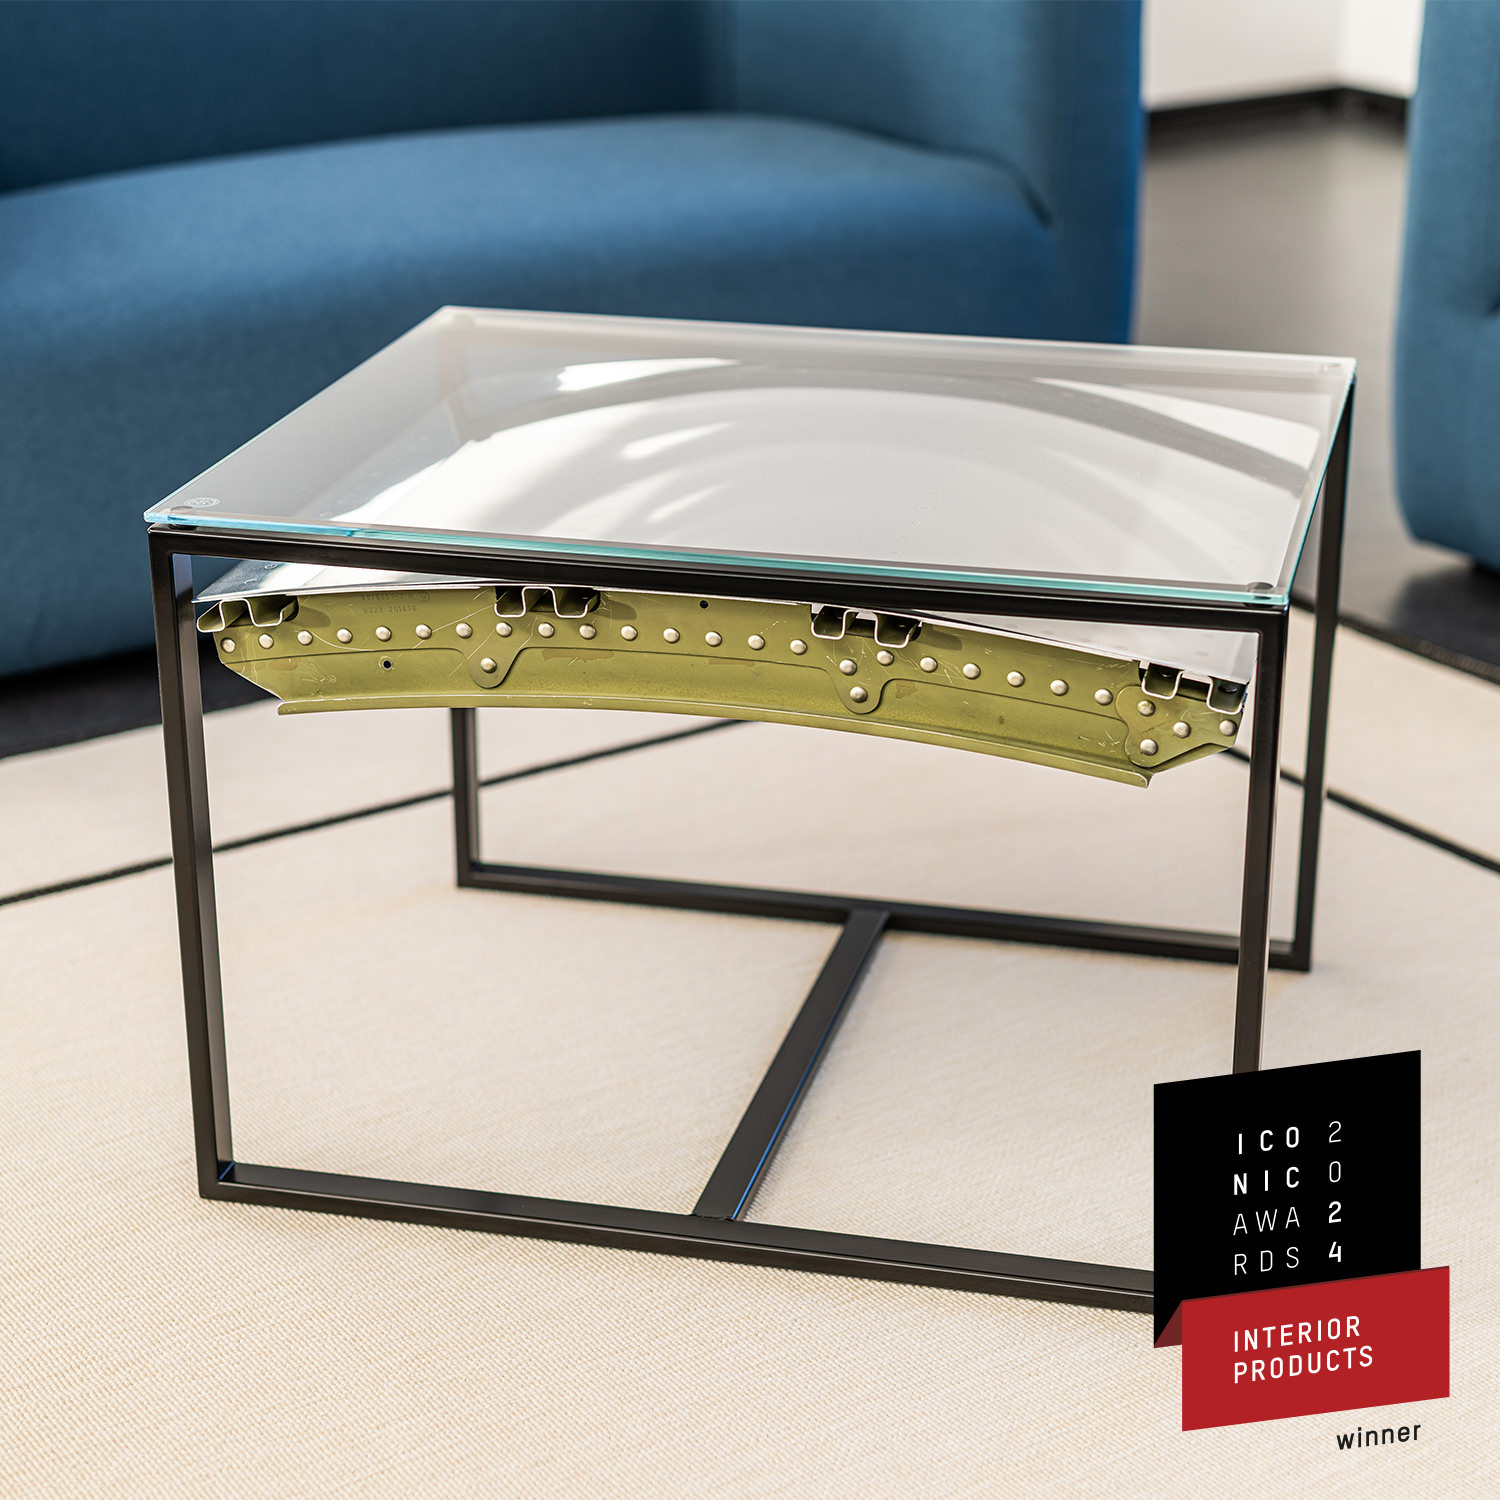 Side Table from Aircraft Parts with Glass Top McDonnell Douglas MD-80, High-Gloss Polished, Frame: Black RAL 9011, approx. 54 x 67 cm